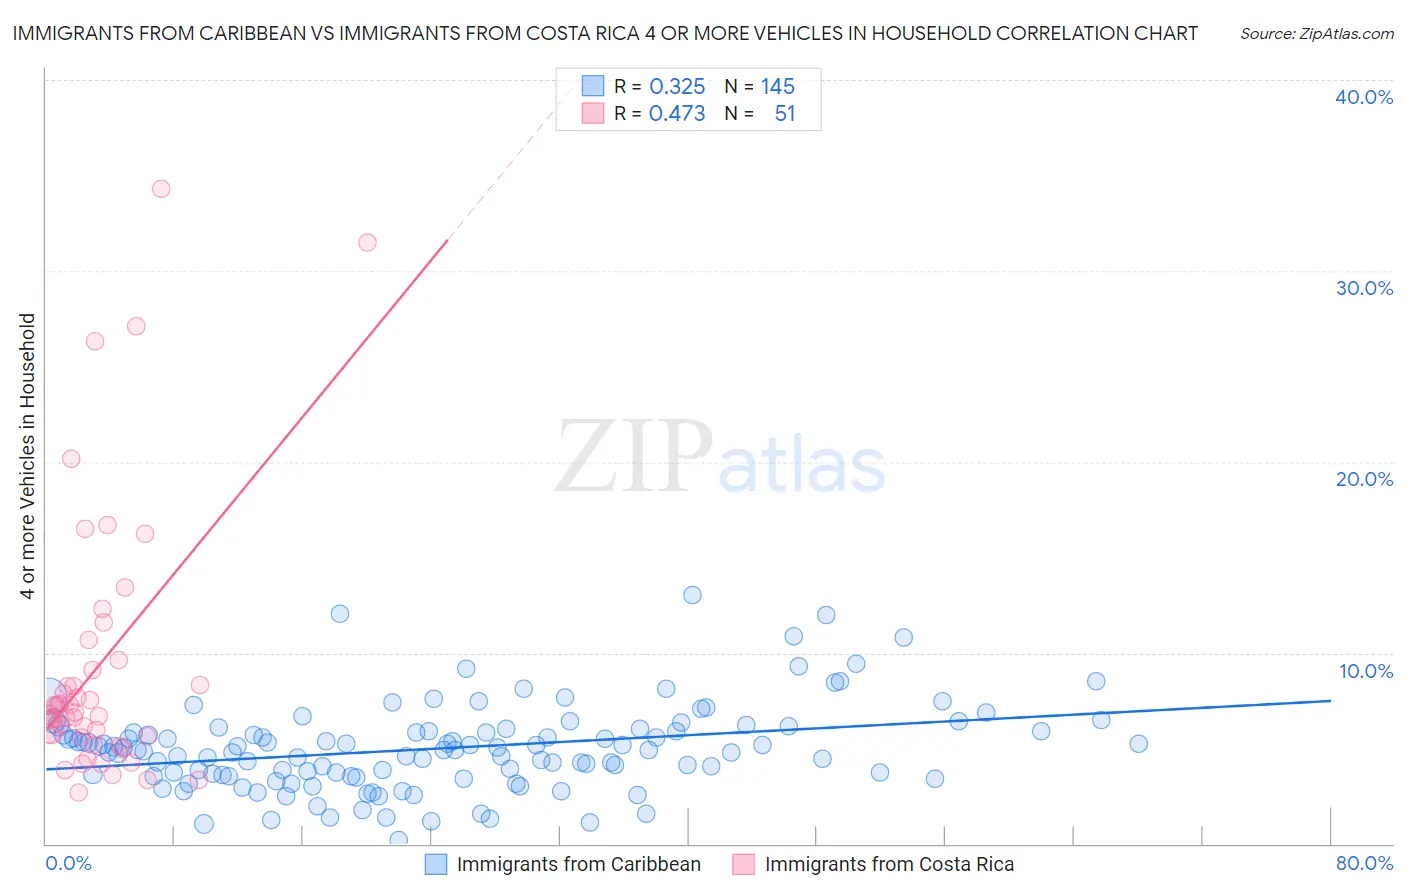 Immigrants from Caribbean vs Immigrants from Costa Rica 4 or more Vehicles in Household